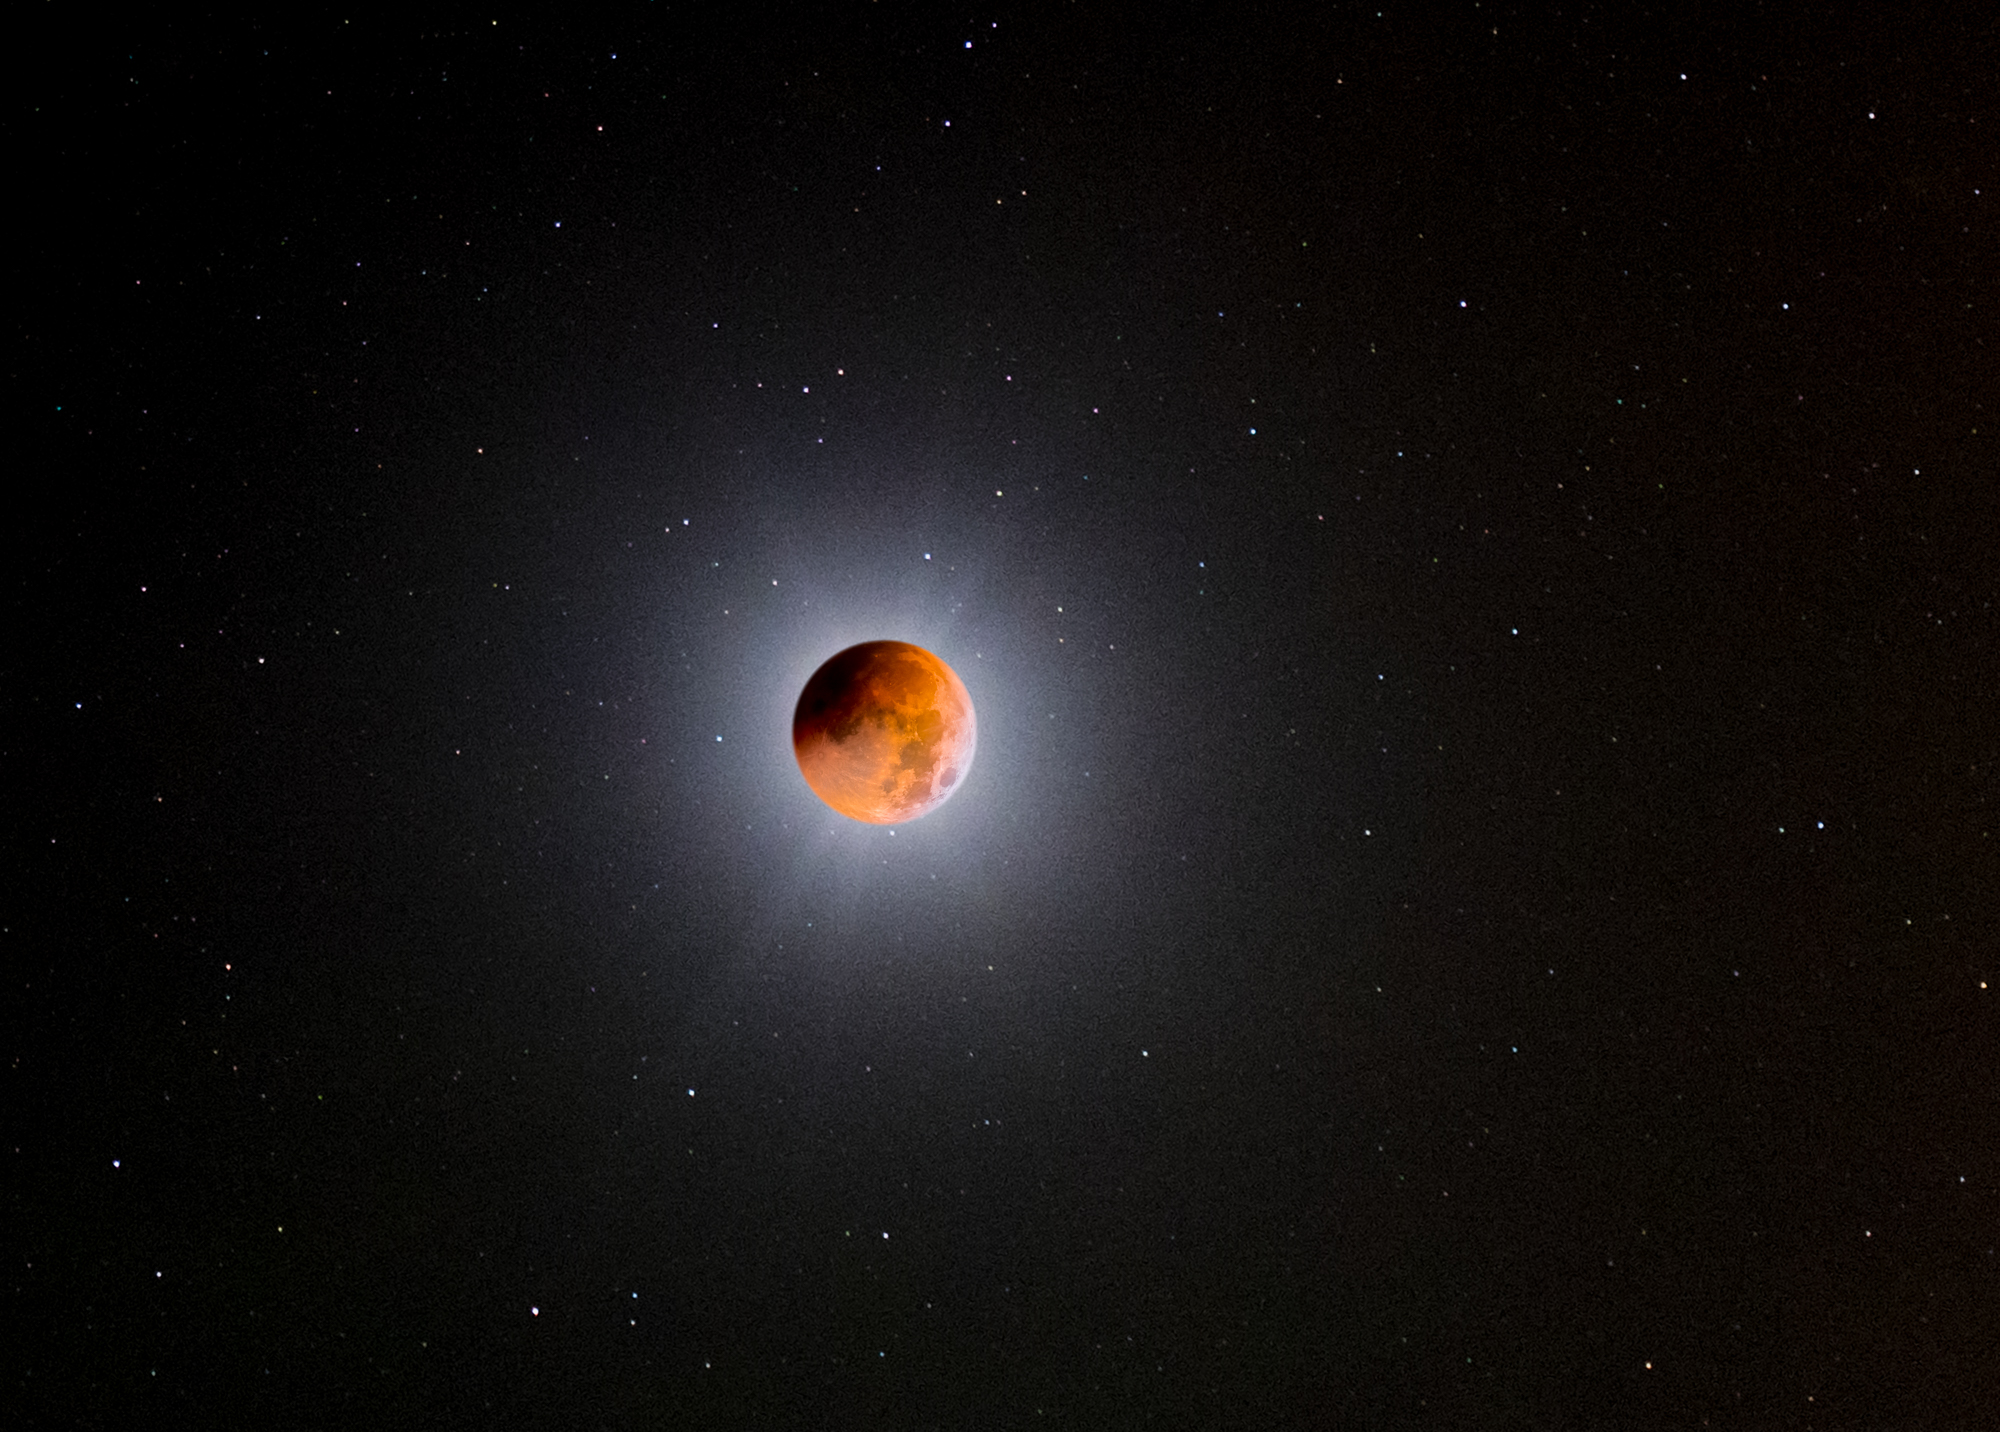 Eclipsed moon with lots of stars in the sky